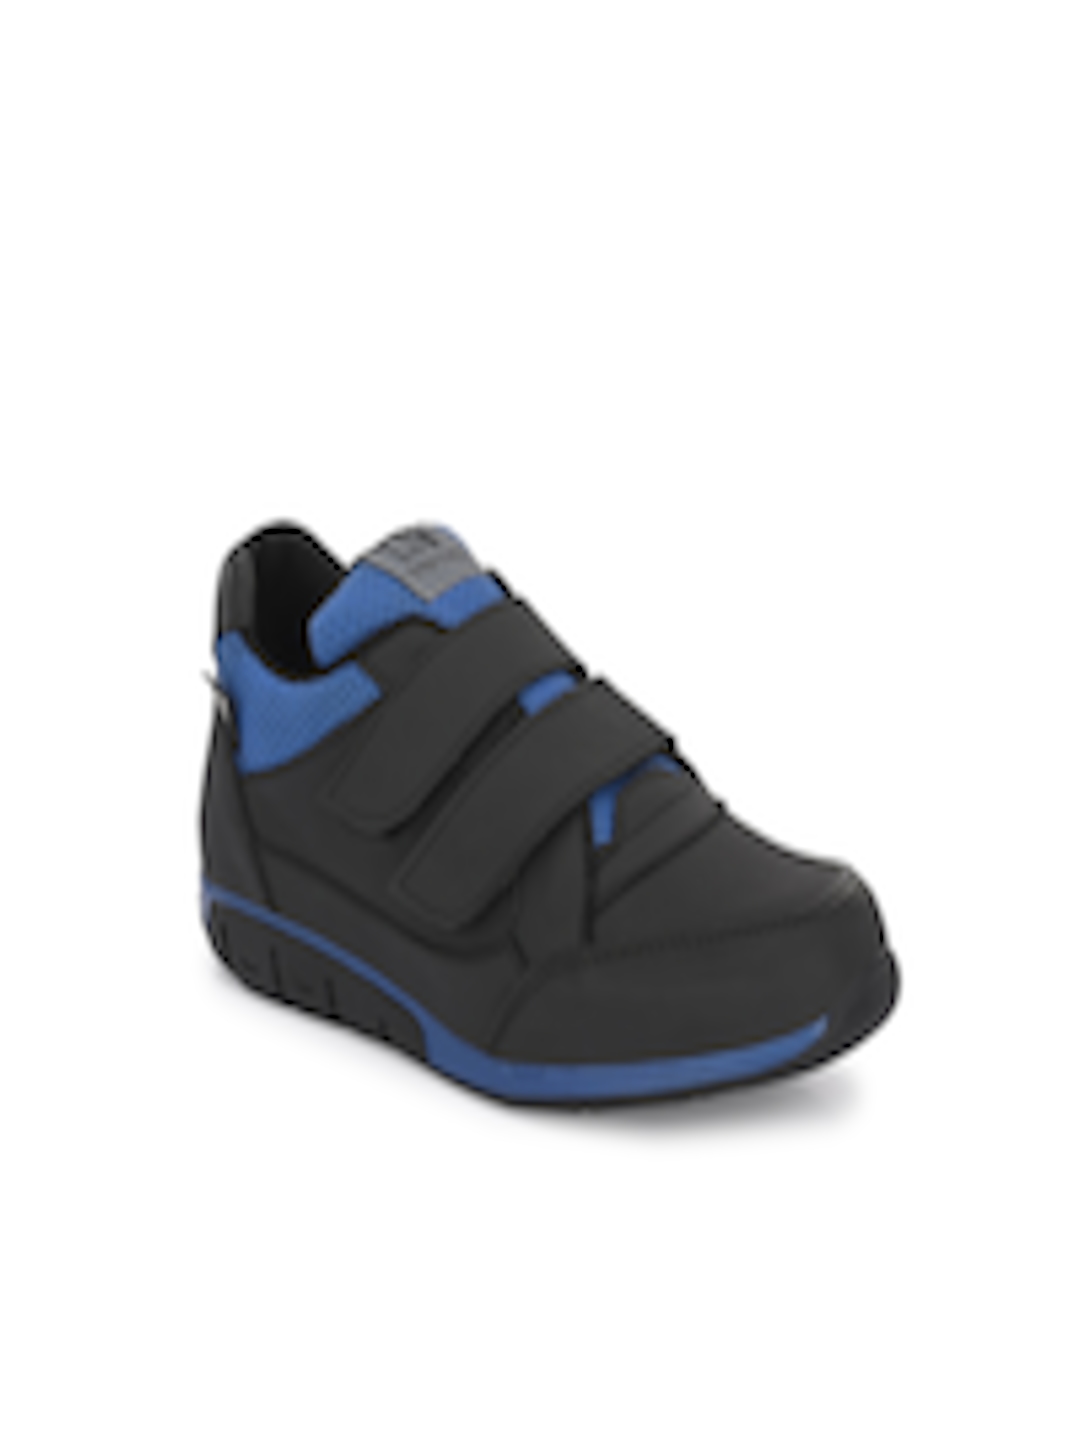 Buy Eego Italy Men Leather Velcro Trekking Shoes - Sports Shoes for Men ...